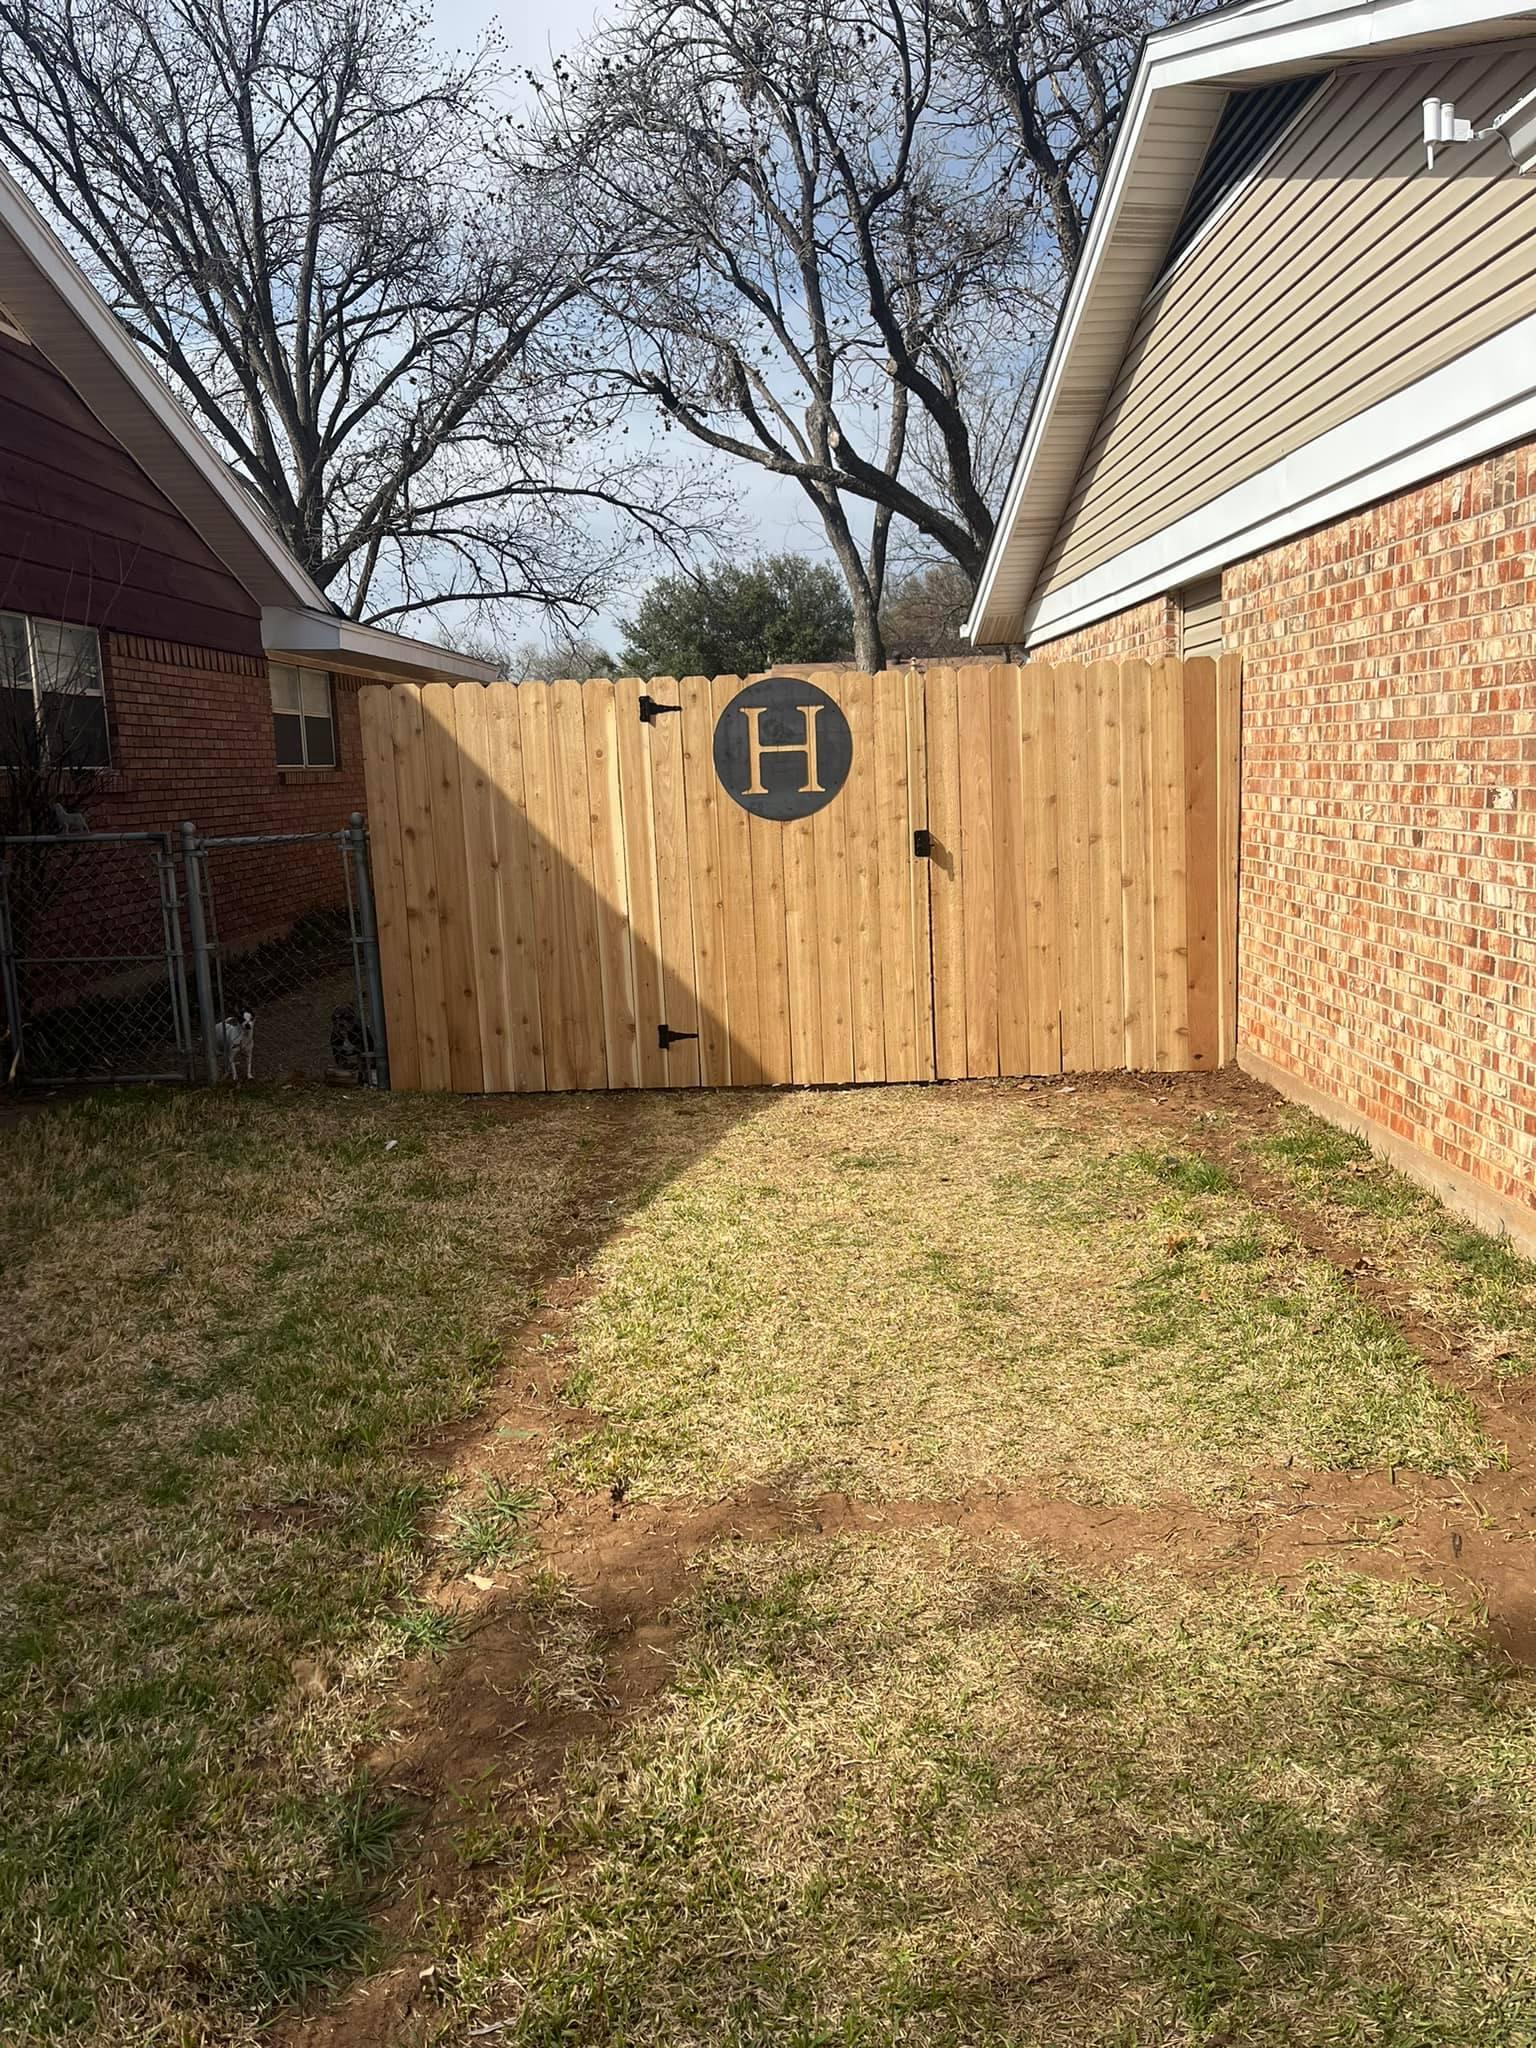 Fencing, Staining and Remodeling company Greenroyd Fencing & Construction in Pilot Point, TX